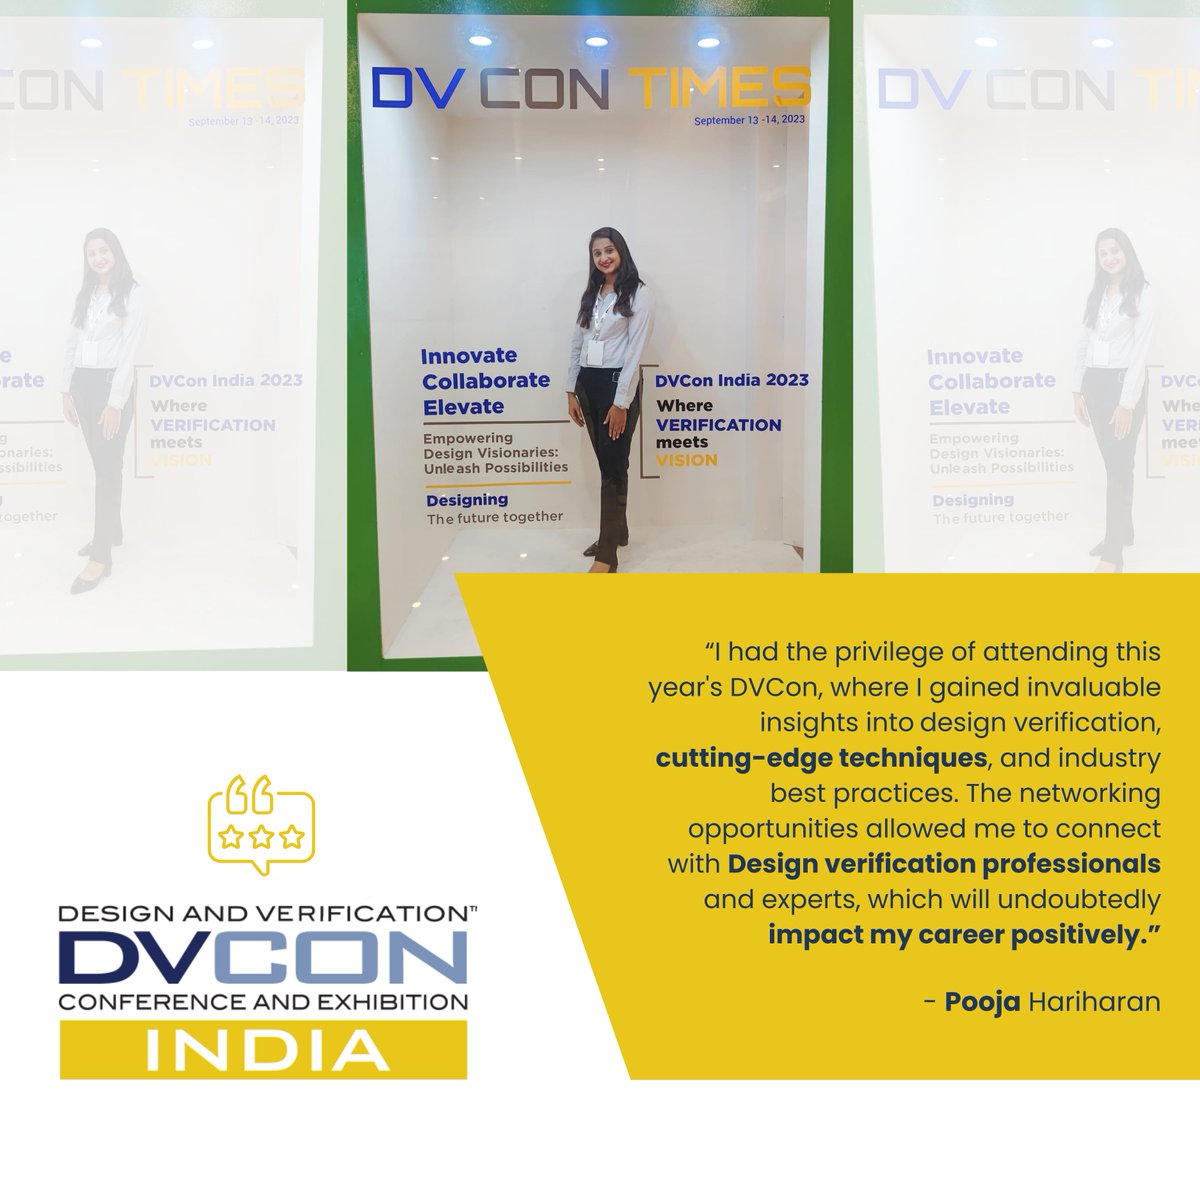 Our team shares their experience from #DVCON2023, which was focused on cutting-edge technology in design and verification.

#dvconindia2023 #dvcon #edveon #edveontechnologies #edveontech #DVCON2023 #DesignAndVerification #CuttingEdgeTech #Innovation #TechnologyConference